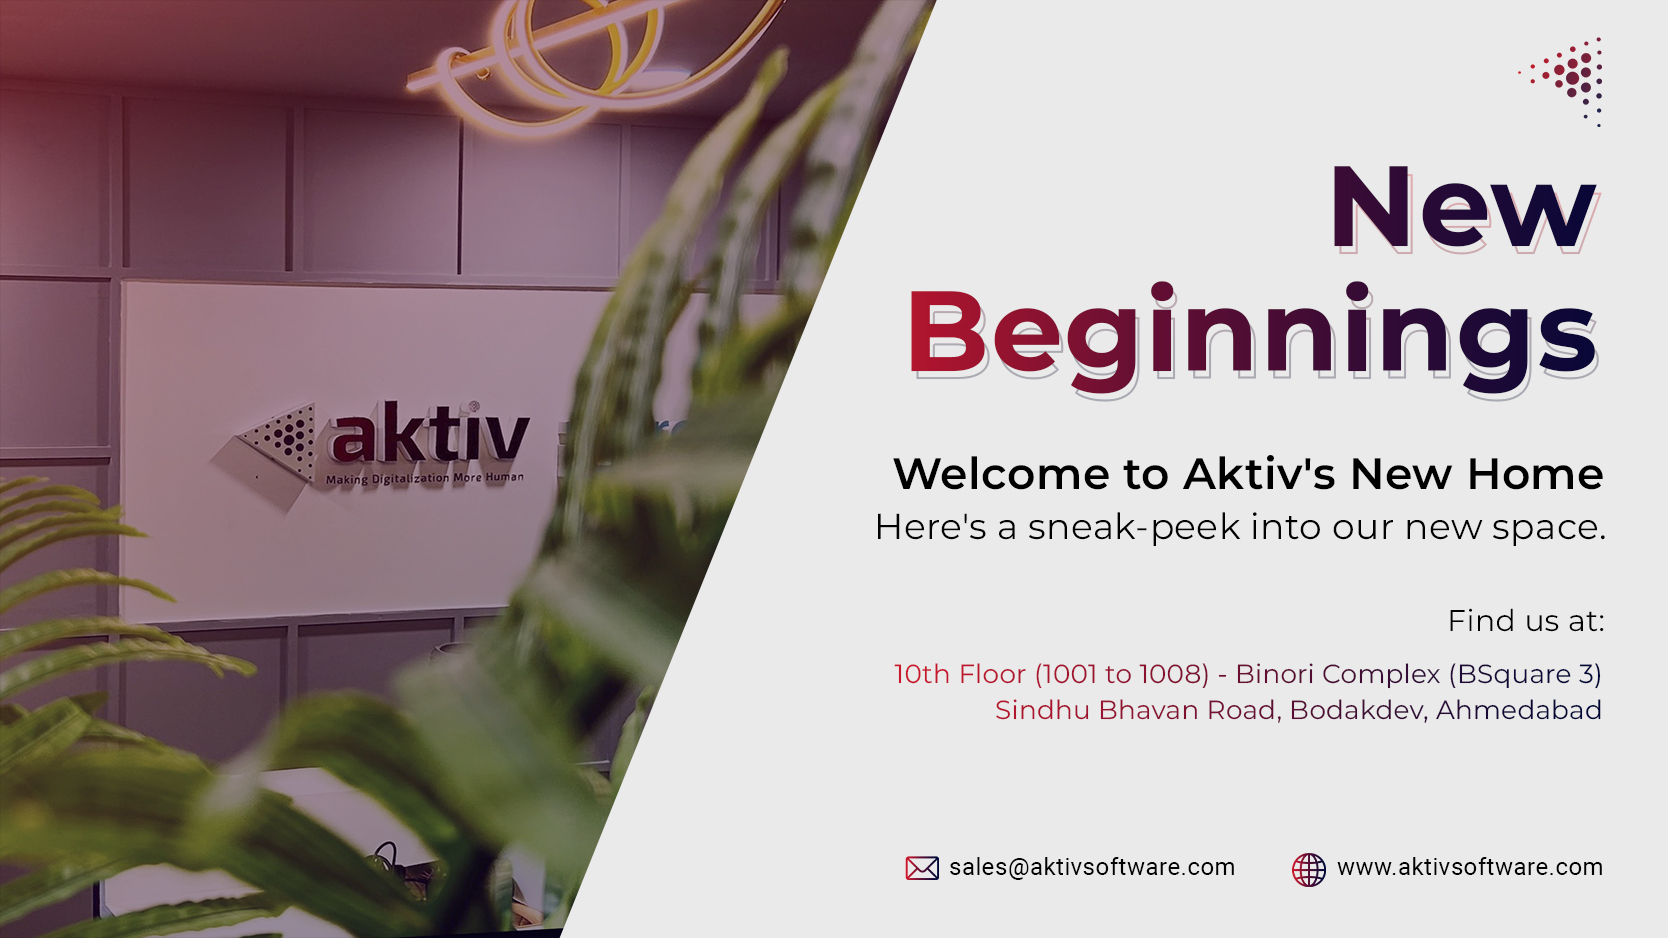 Aktiv has moved to new office space